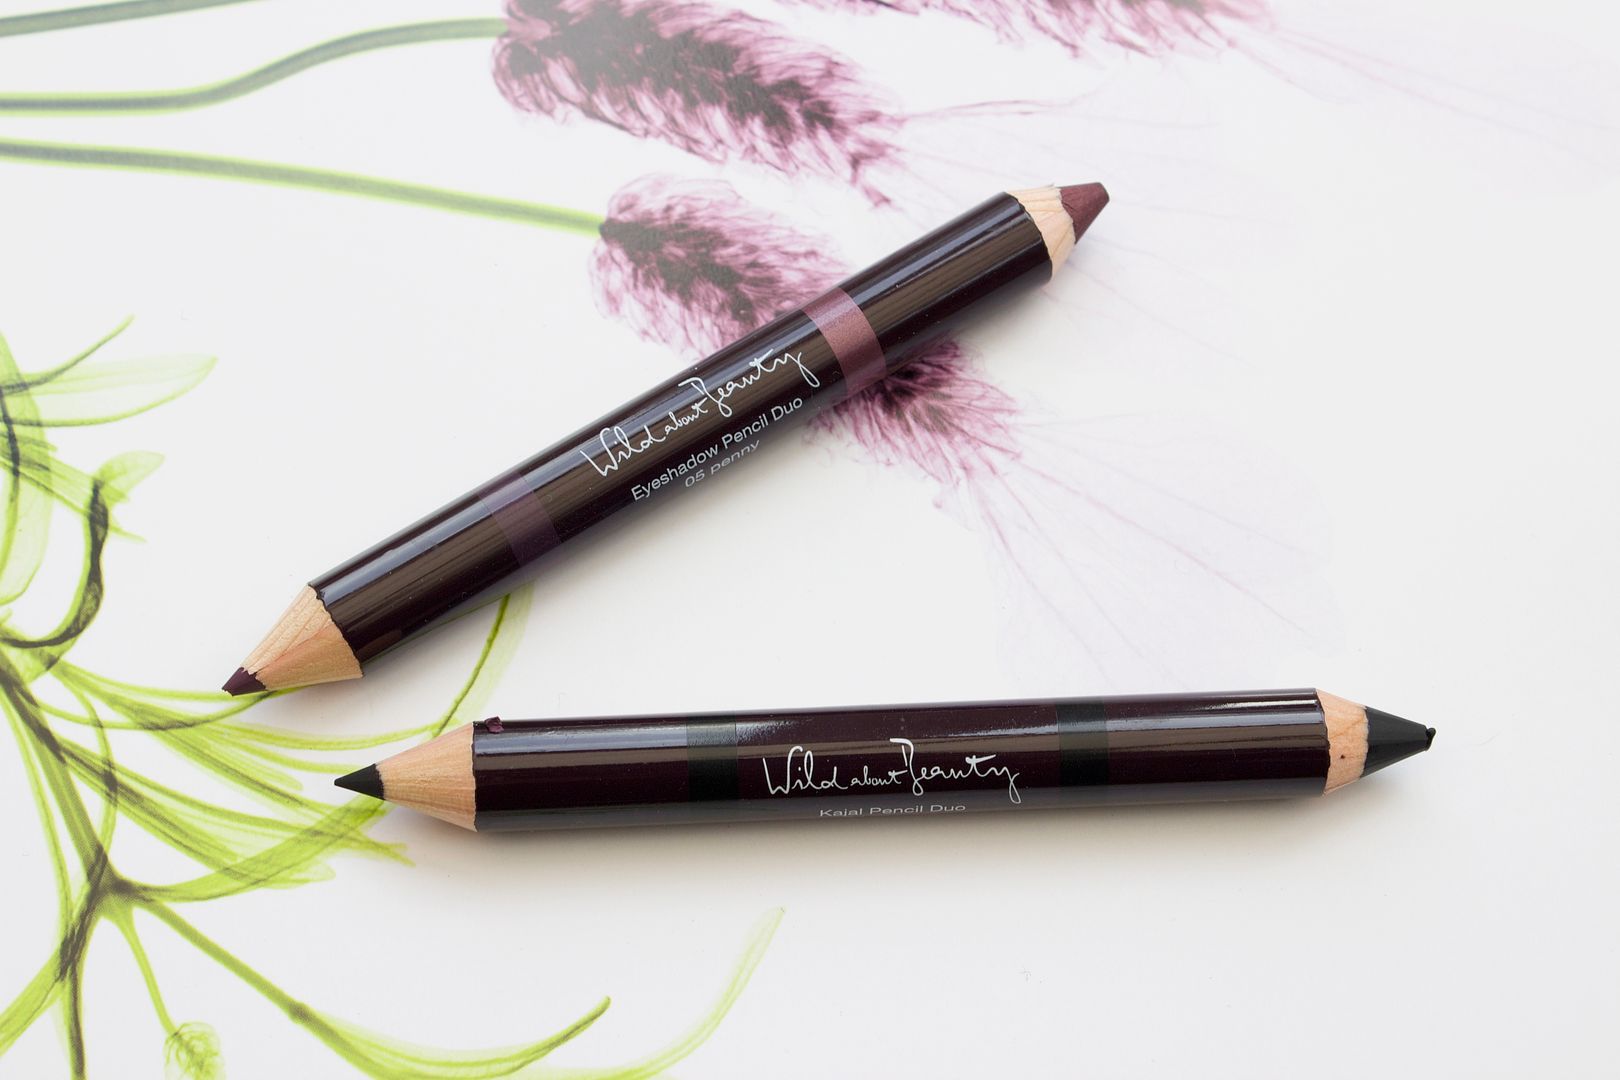 Wild About Beauty Kajal Pencil Duo in Maeve and Eyeshadow Pencil Duo in Penny